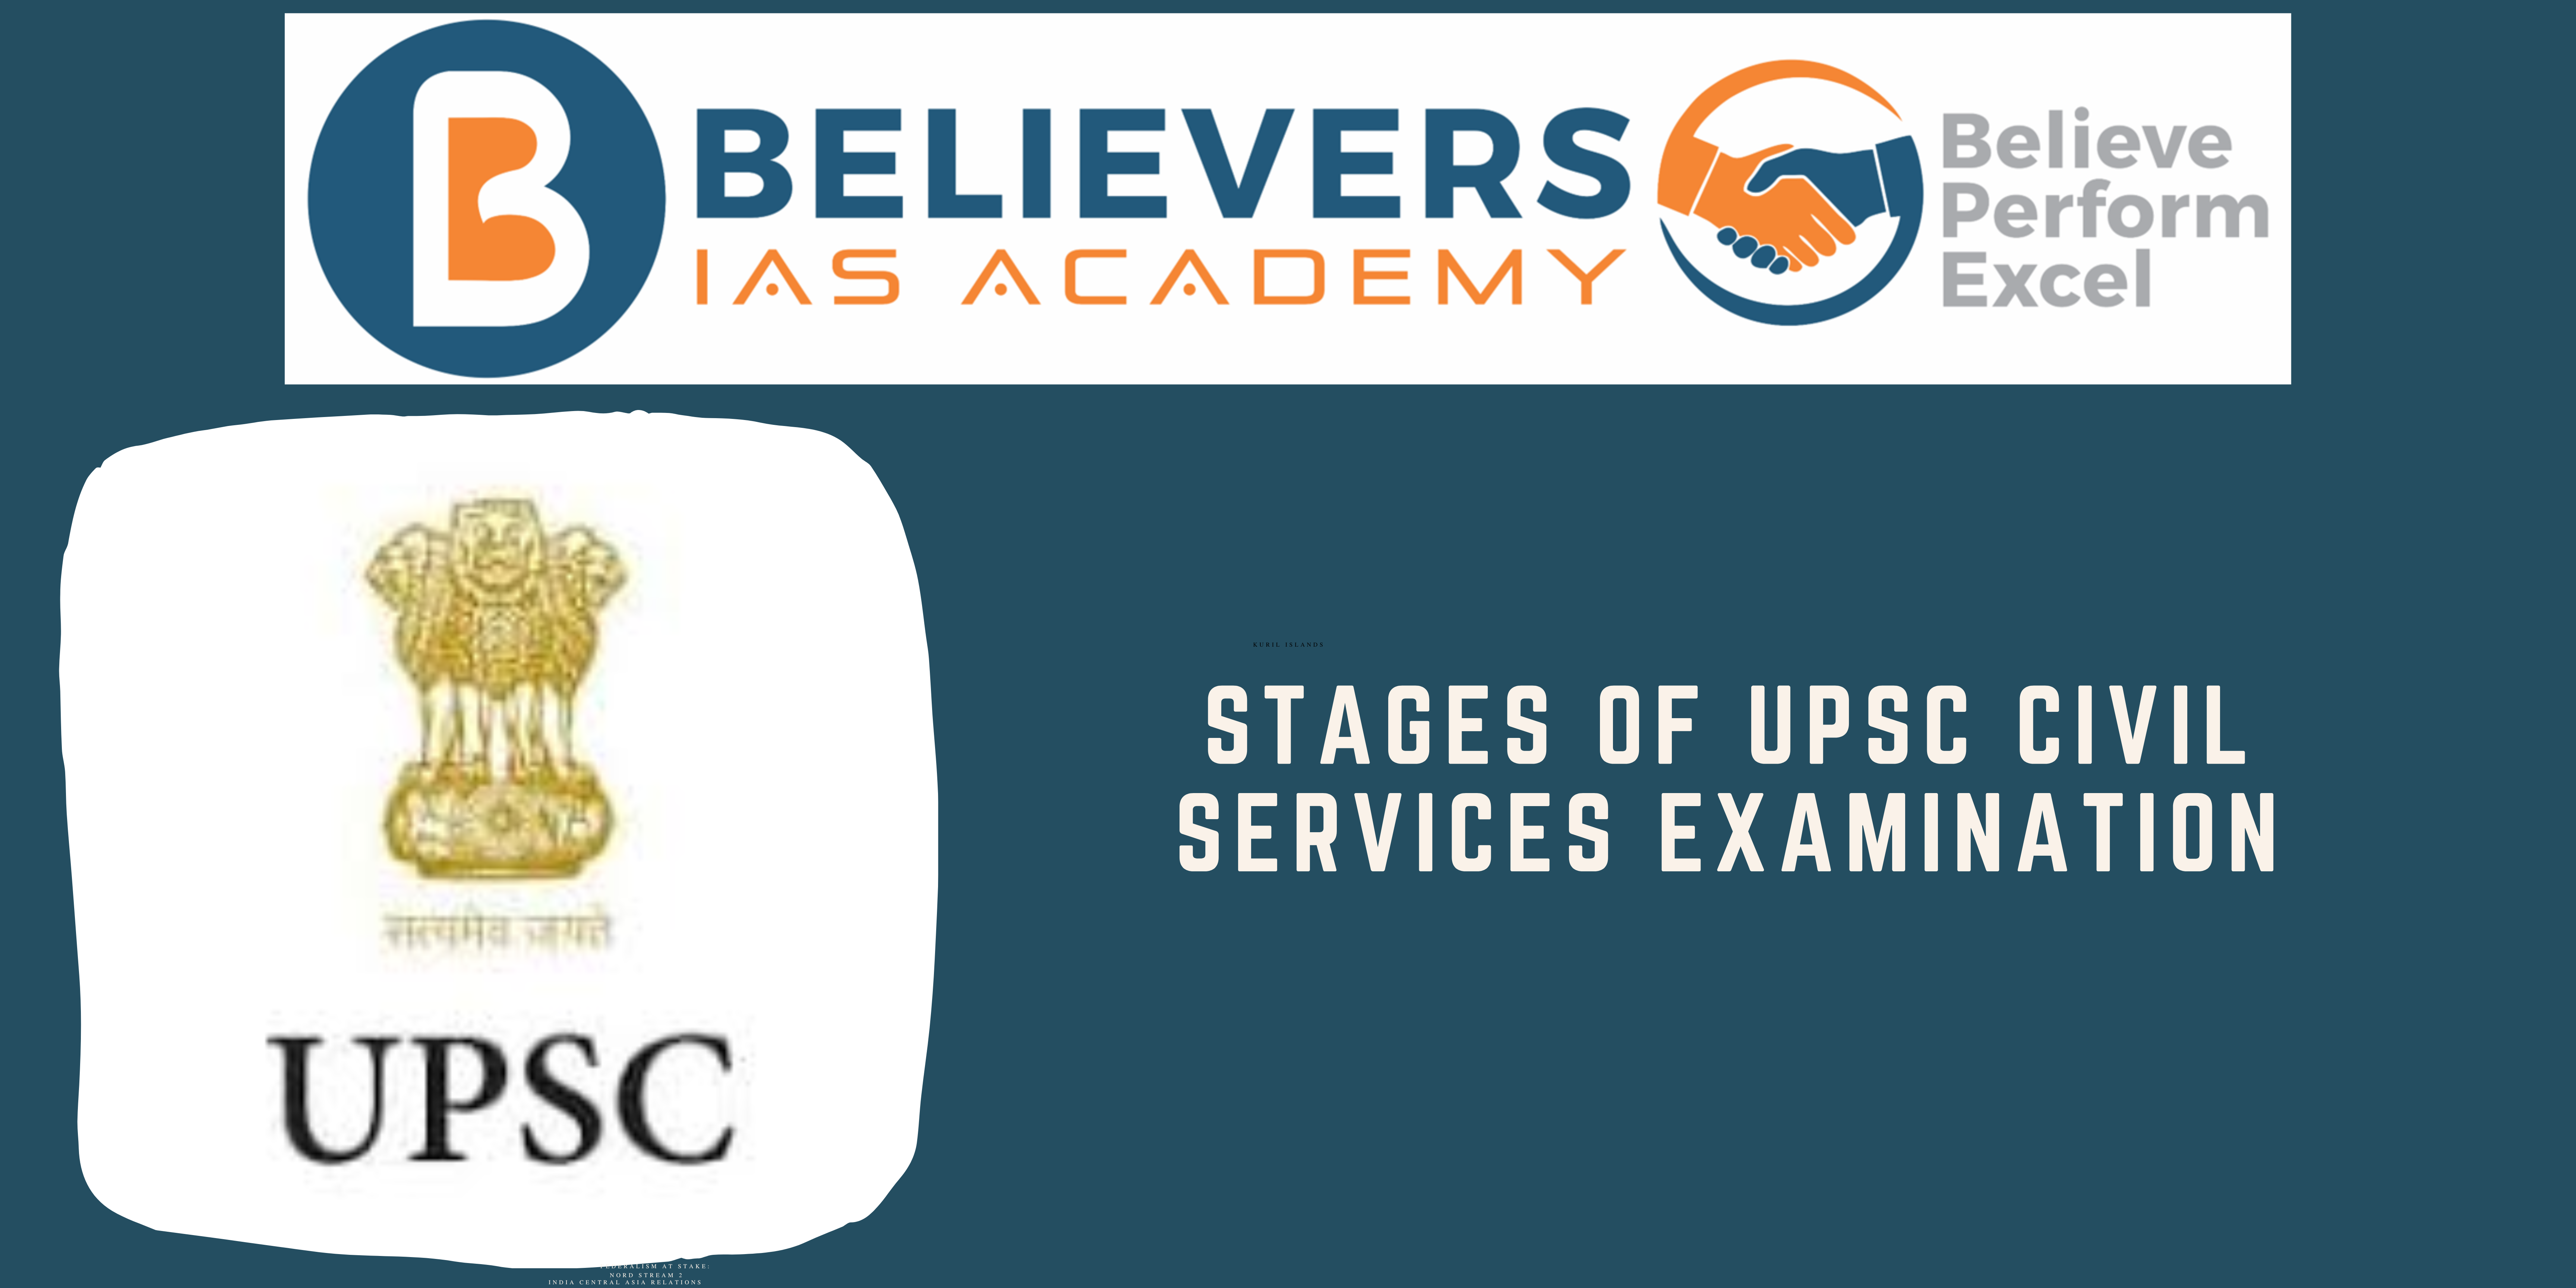 Stages of UPSC Civil Services Examination